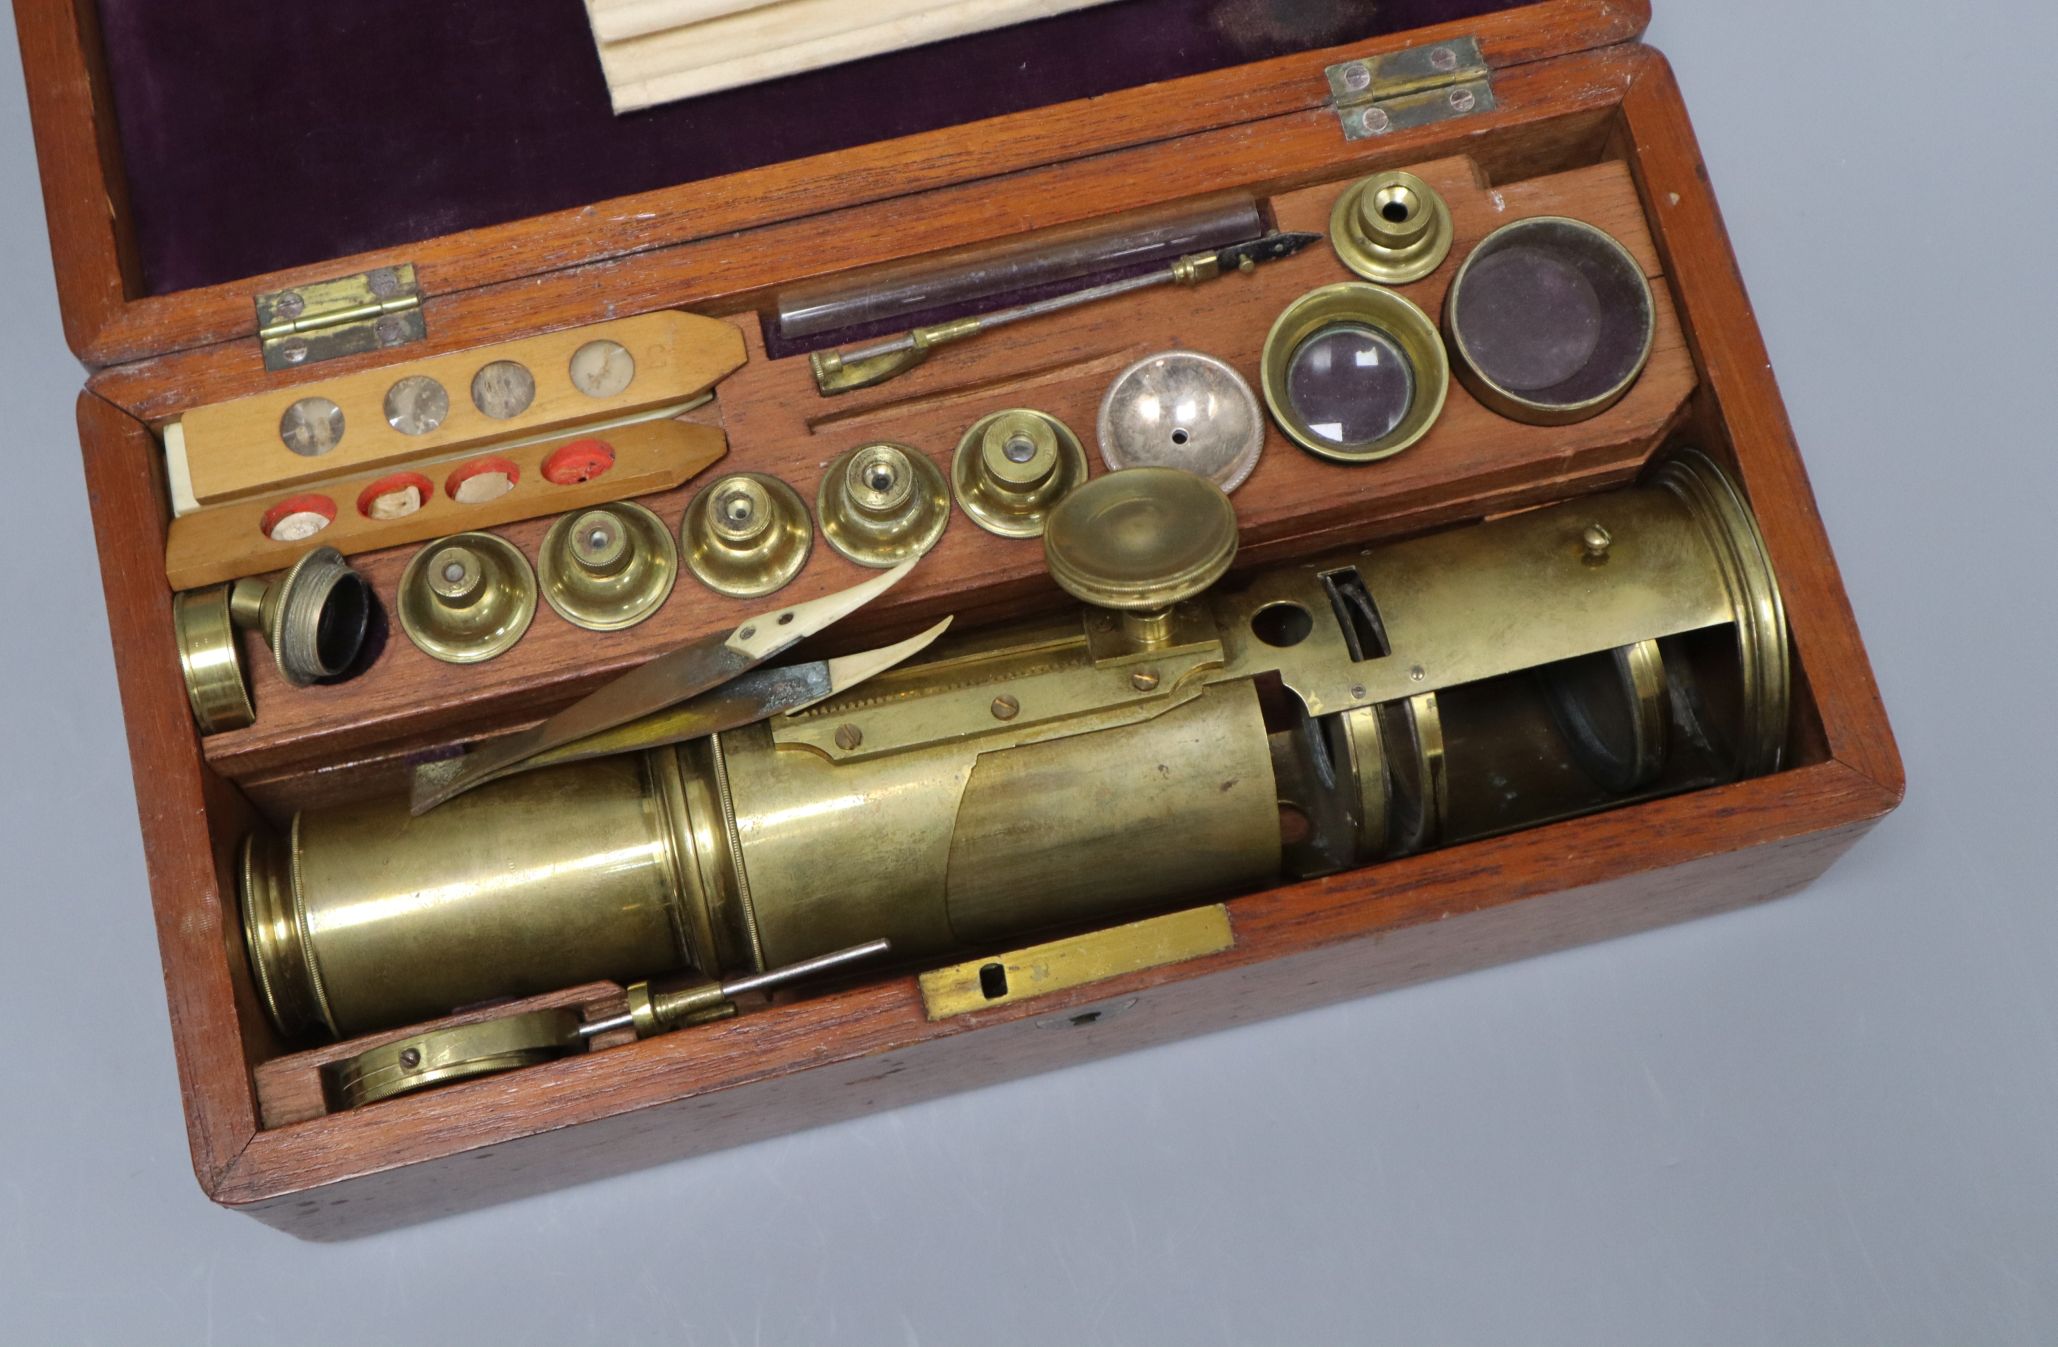 An 18th century brass Culpepper type monocular microscope, together with interchangeable lenses